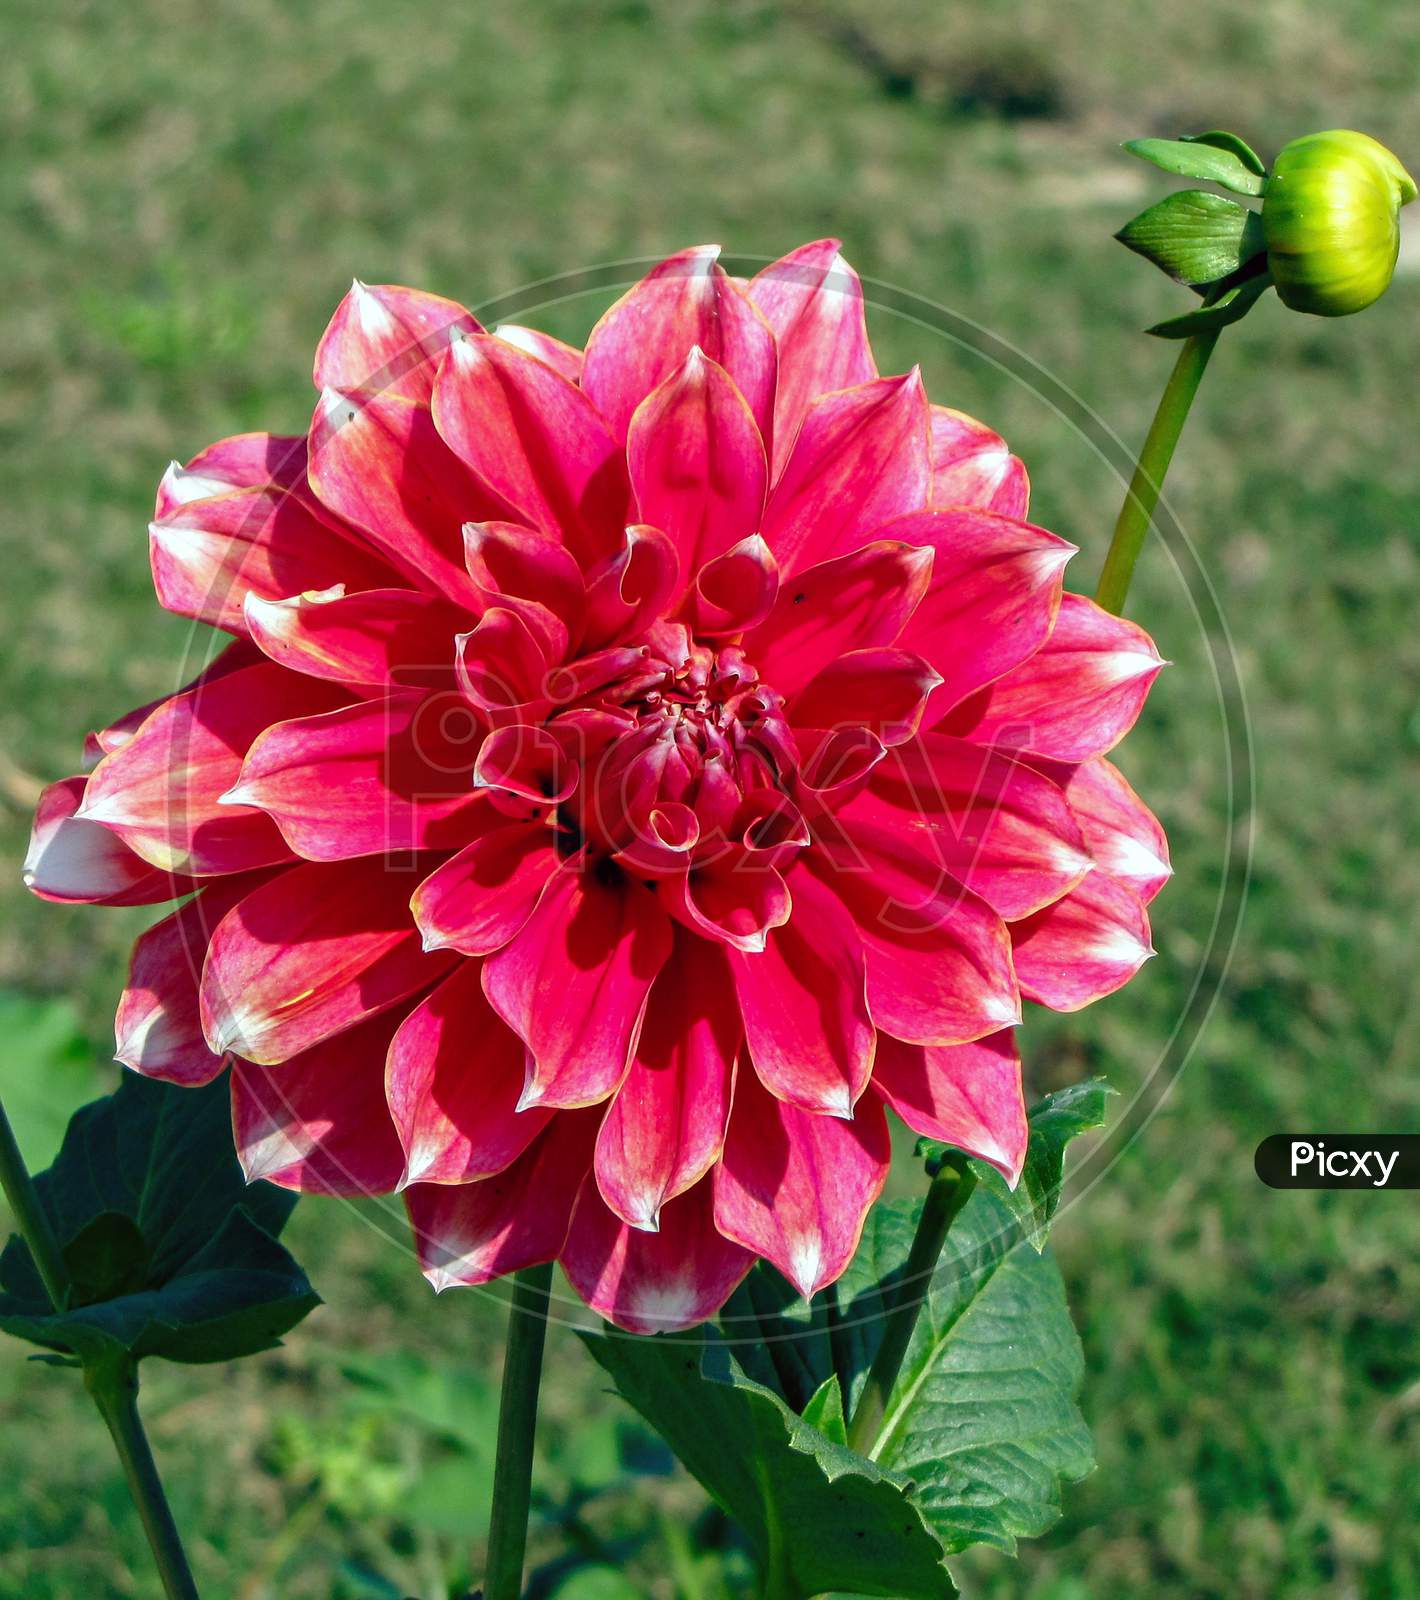 Isolated Pink Dahlia Flower Shinning In Sunlight.